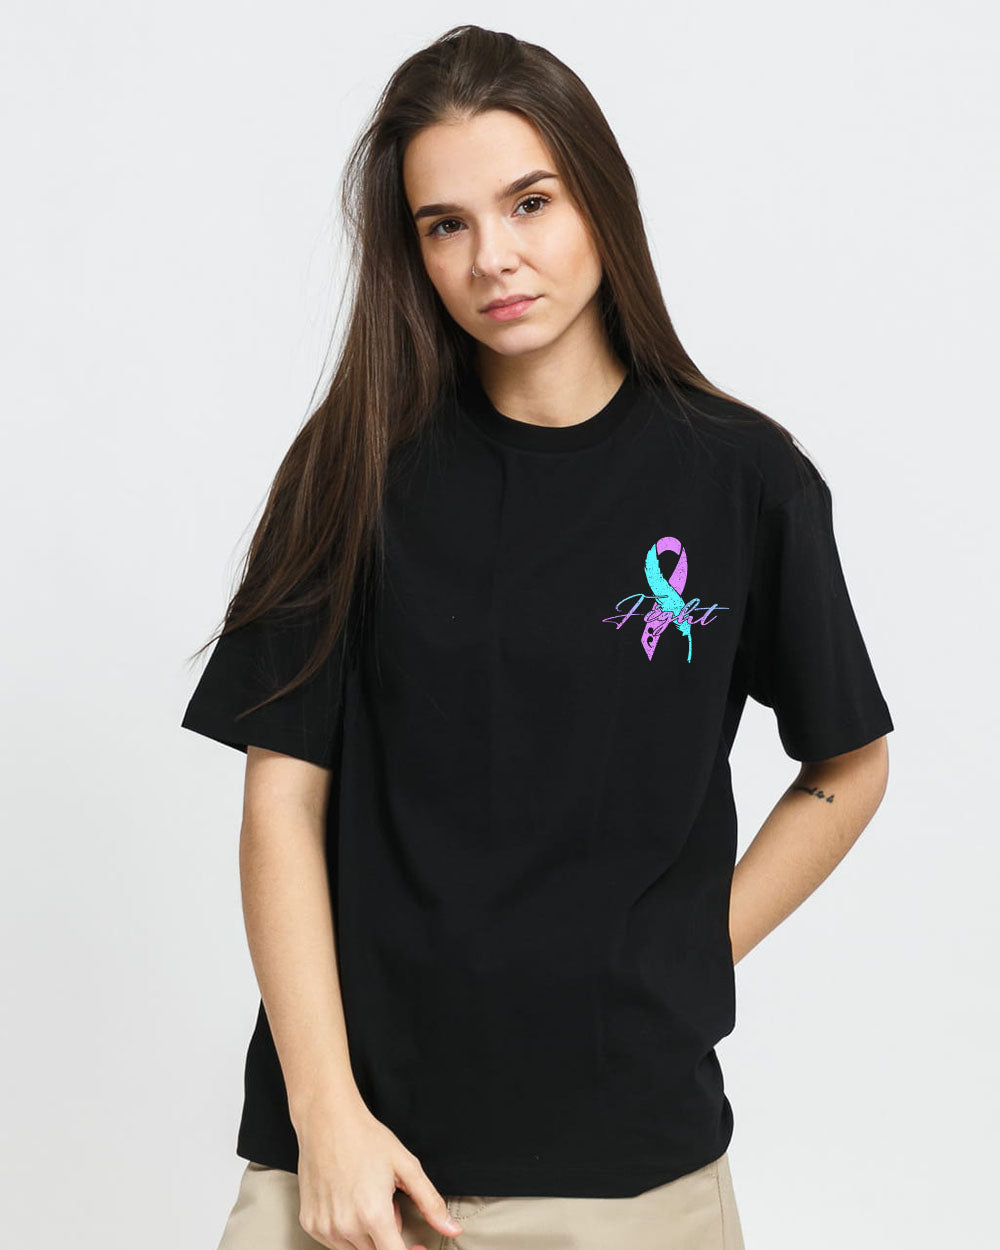 Not All Wounds Are Visible Women's Suicide Prevention Awareness Tshirt